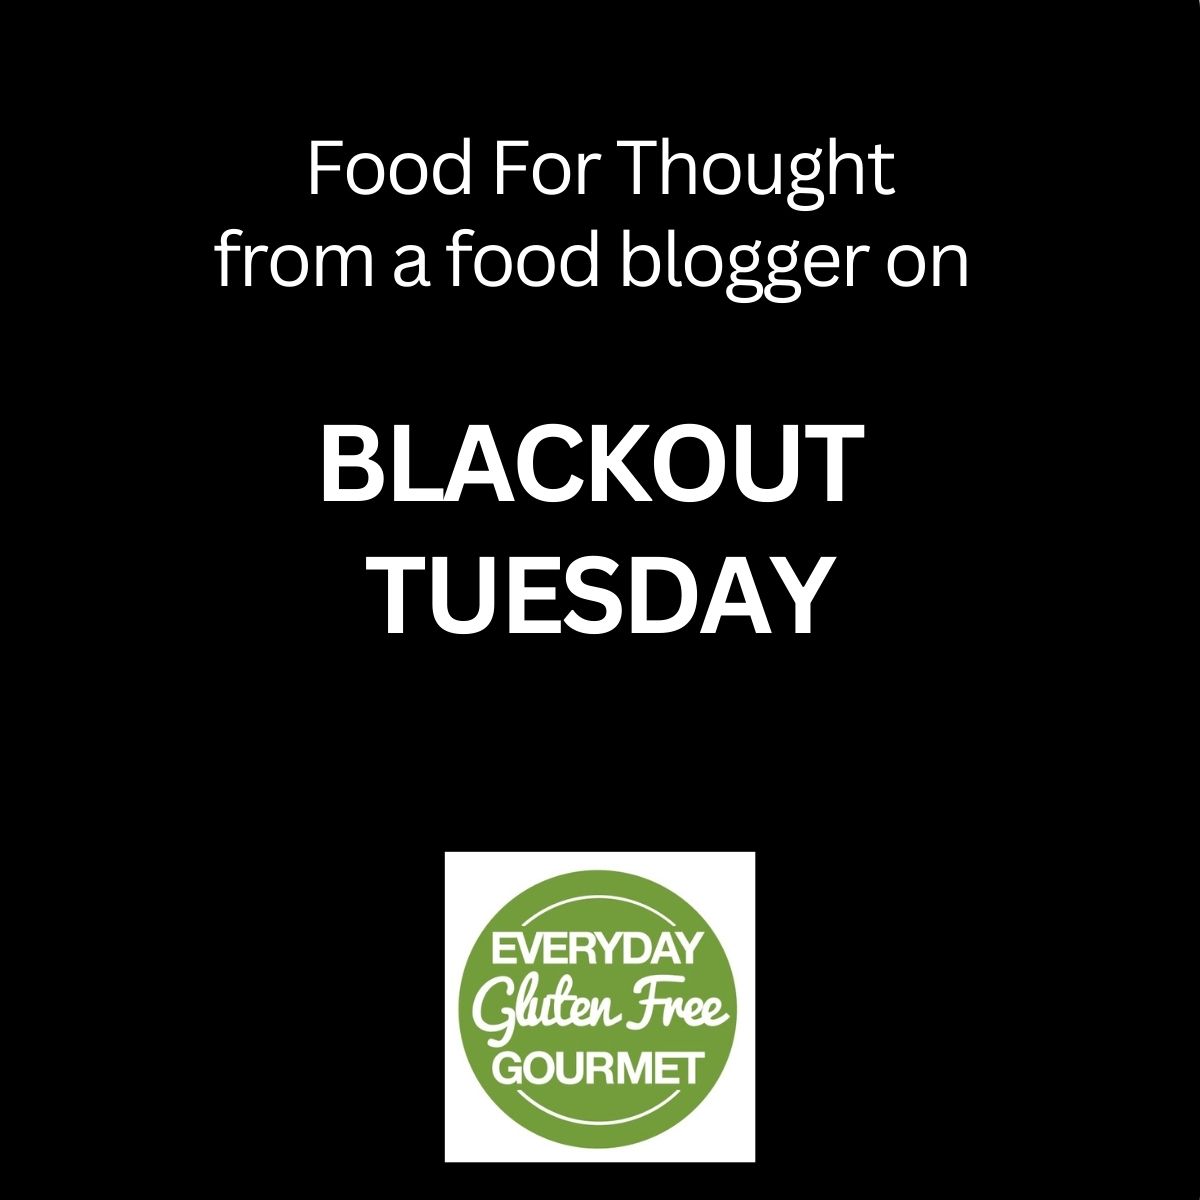 A black square with white letters for Blackout Tuesday with the Everyday Gluten Free Gourmet logo.